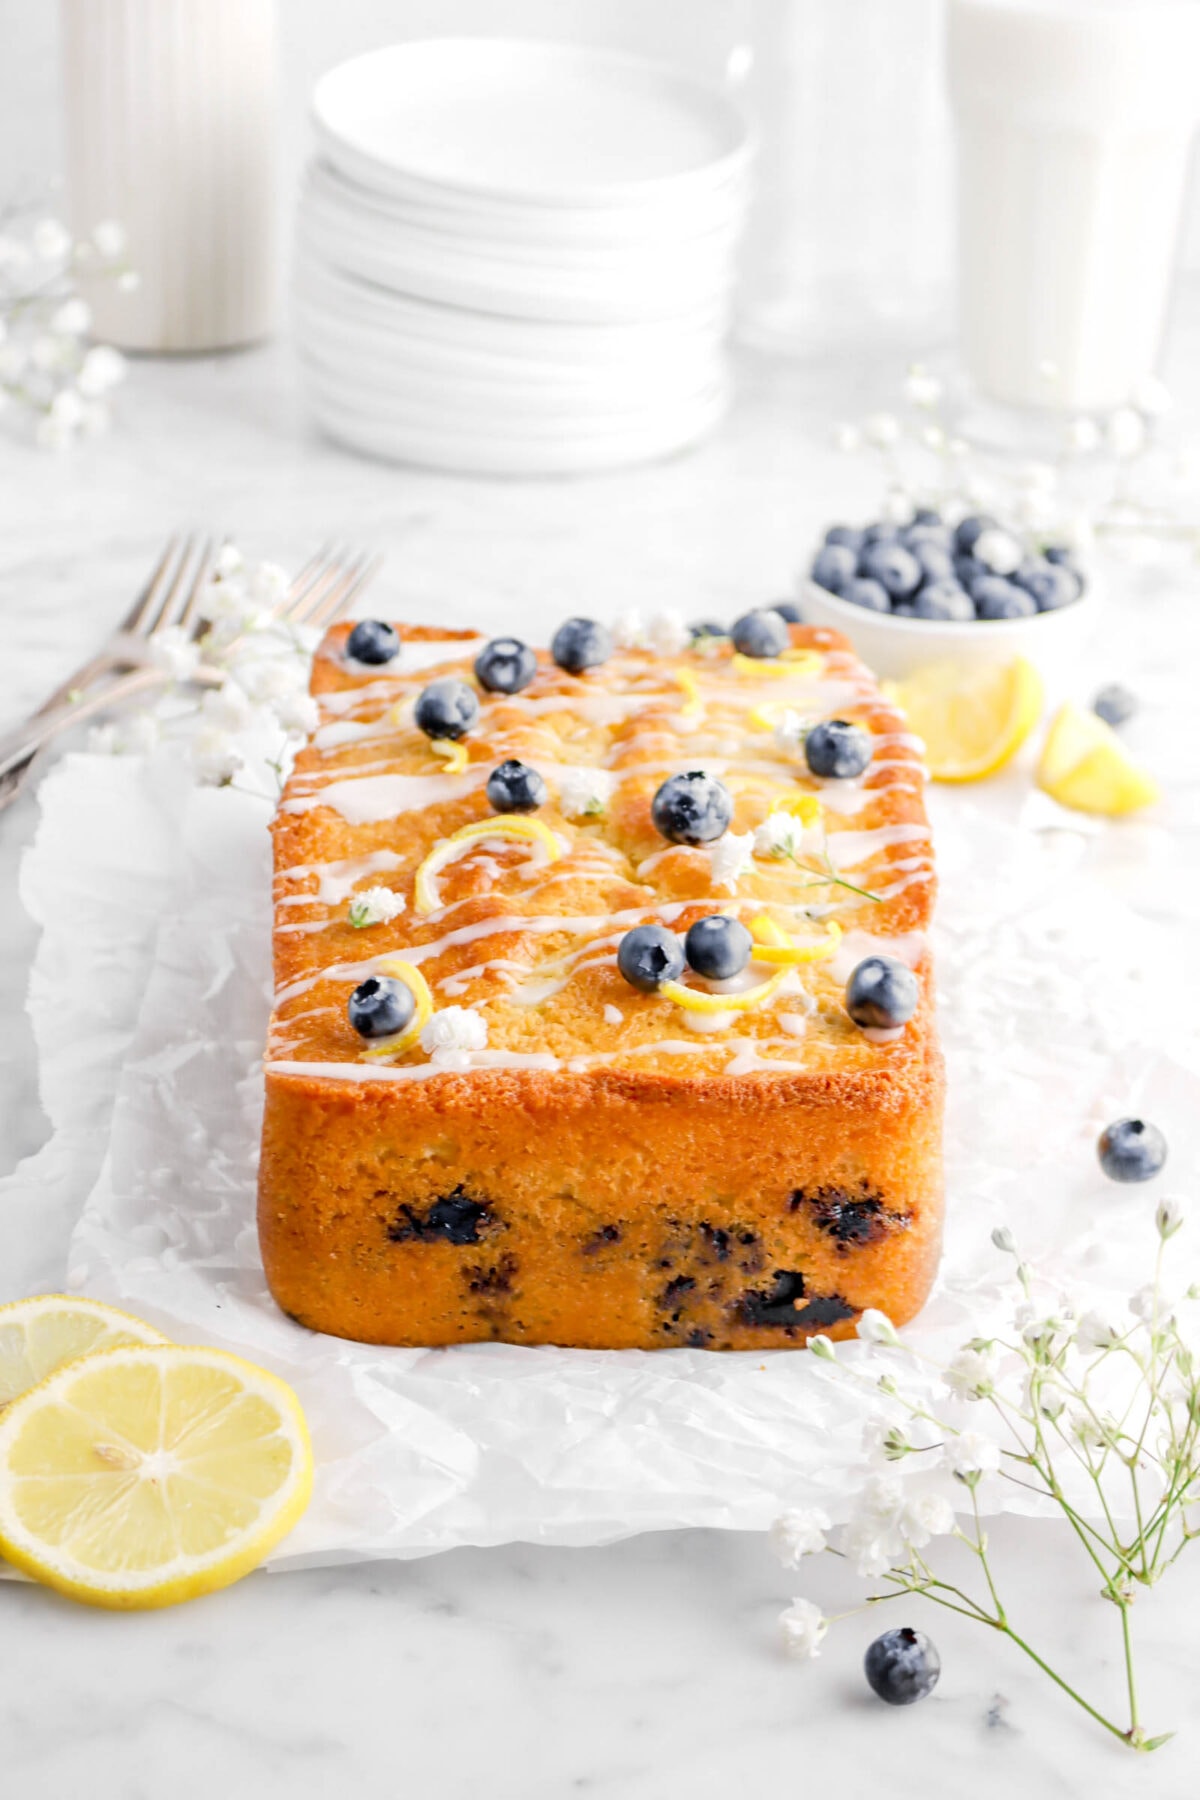 front photo of loaf cake on parchment paper with blueberries, lemon slices, stack of plates, and glass of milk behind with flowers around